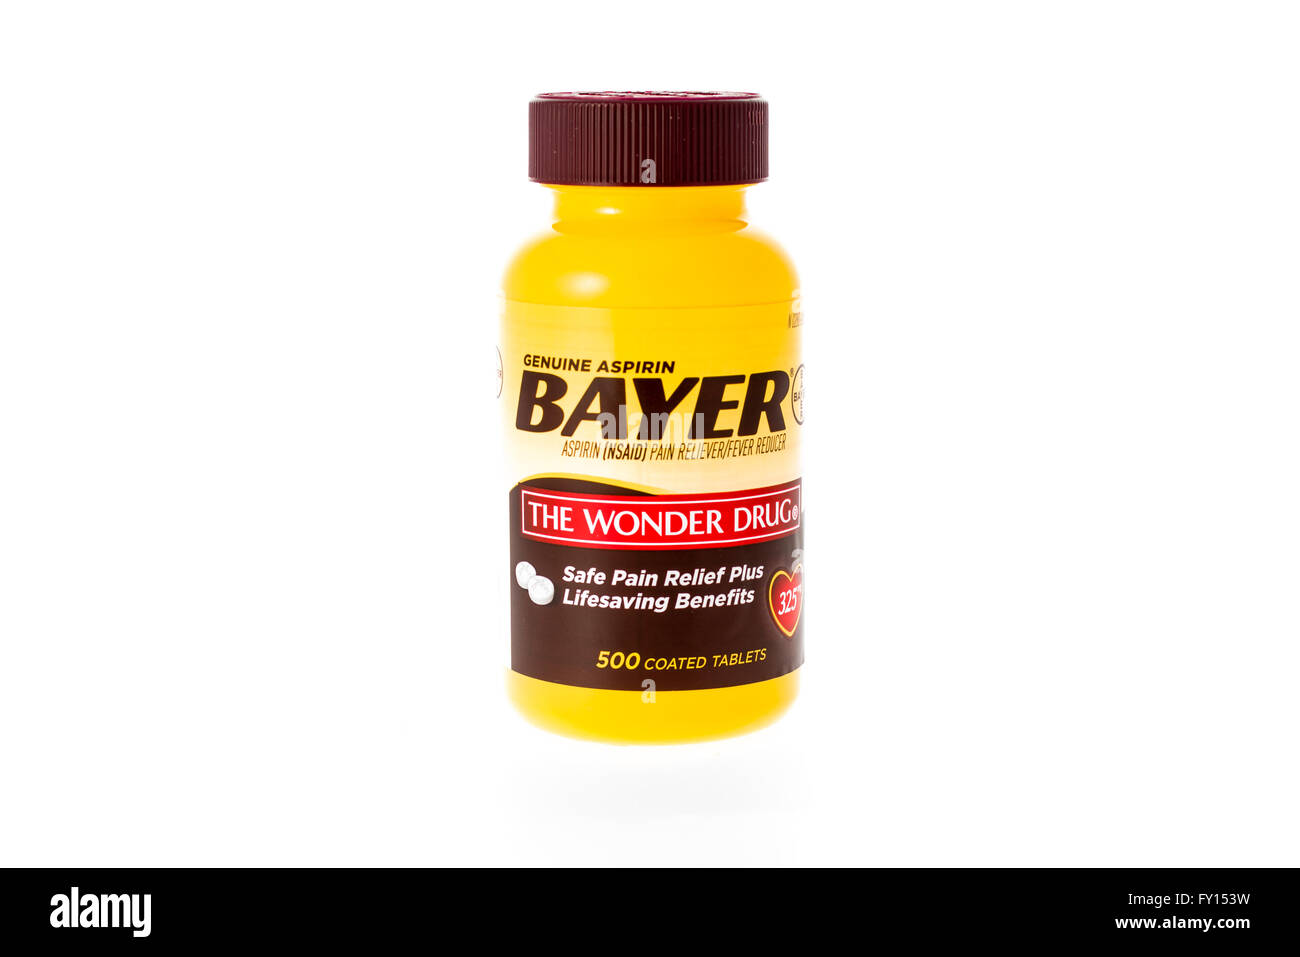 Winneconne, WI - 9 February 2015: Bottle of Bayer aspirin 'The Wonder Drug'.  Asperin helps with the relief of pain. Stock Photo